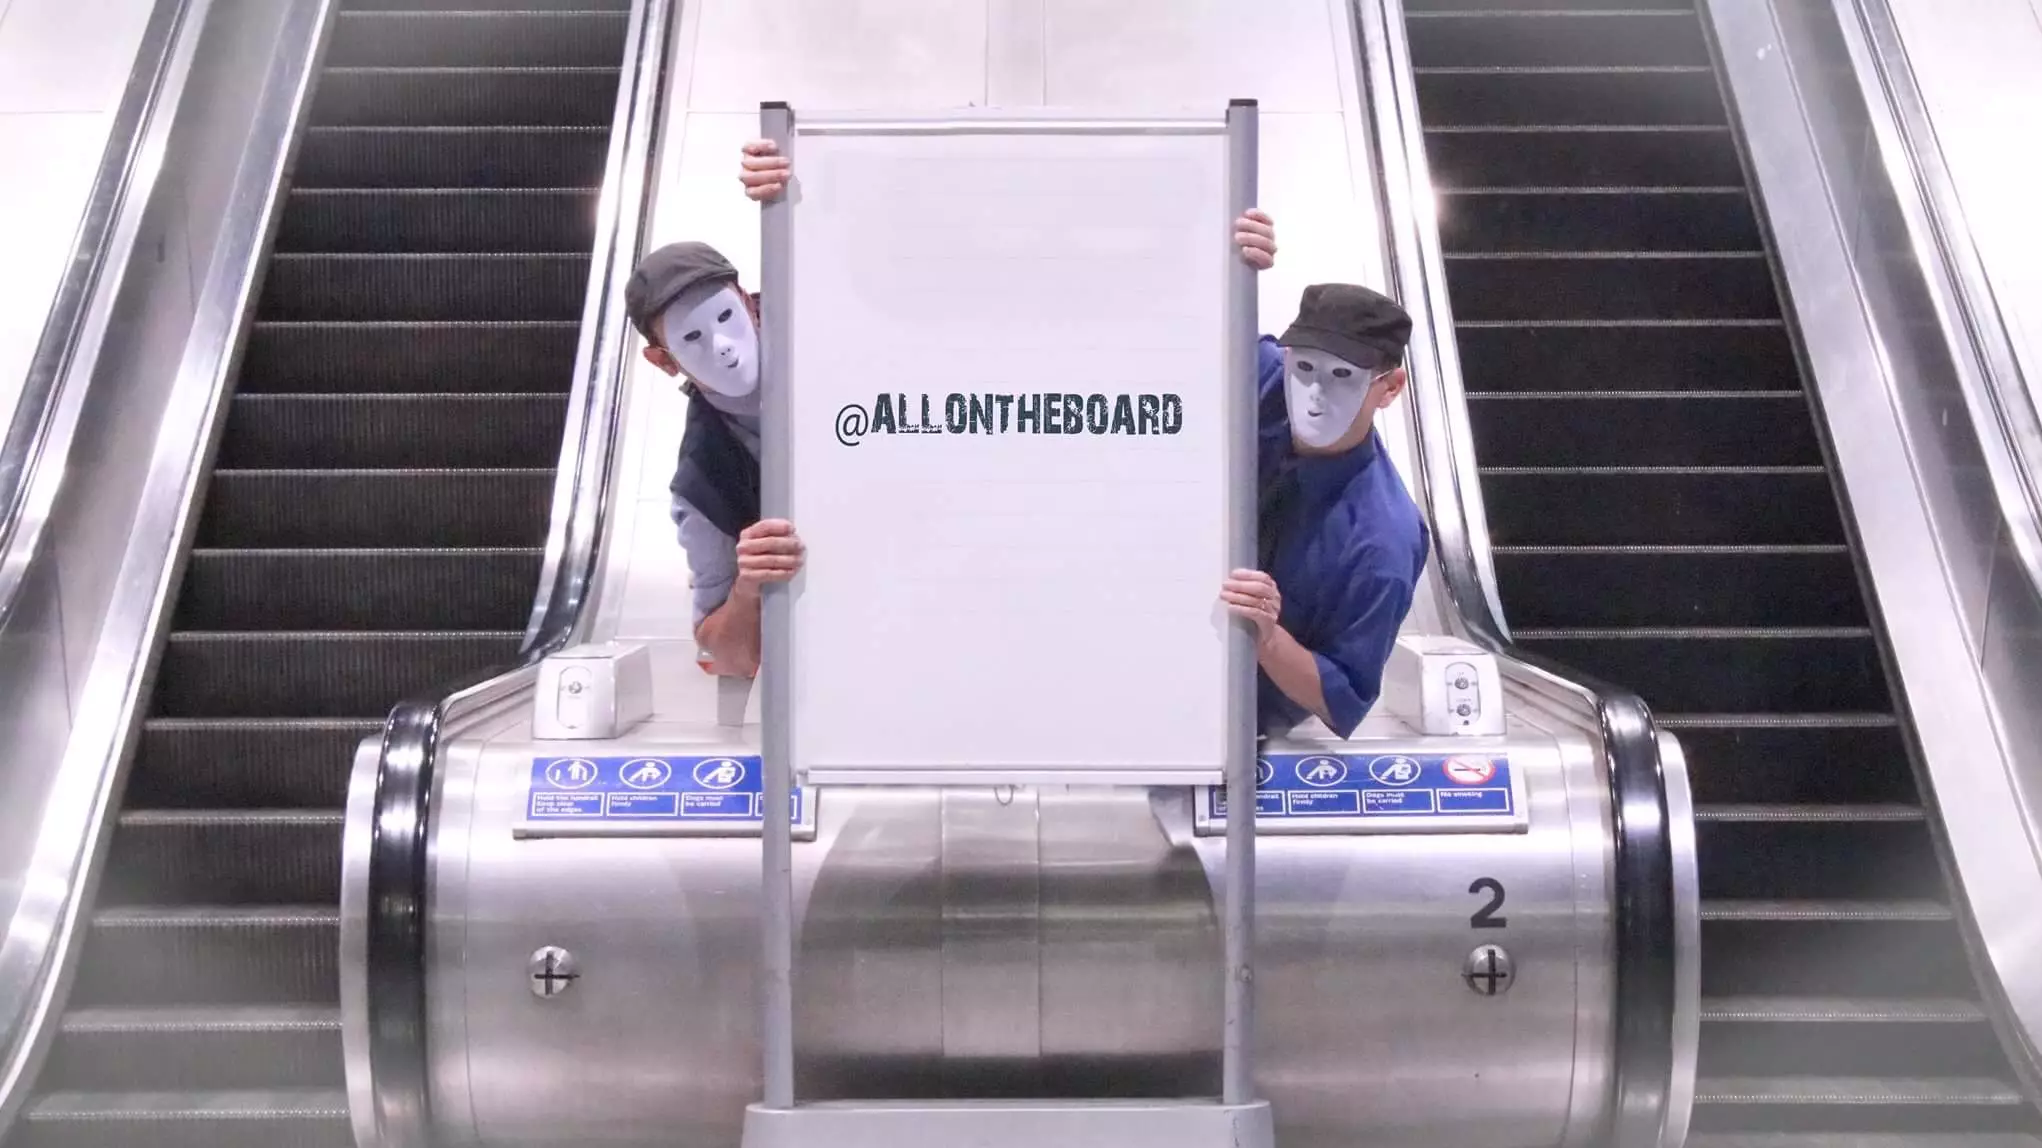 These Mysterious LADs Are The Brain Boxes Behind The Dead Funny Signs On The London Underground